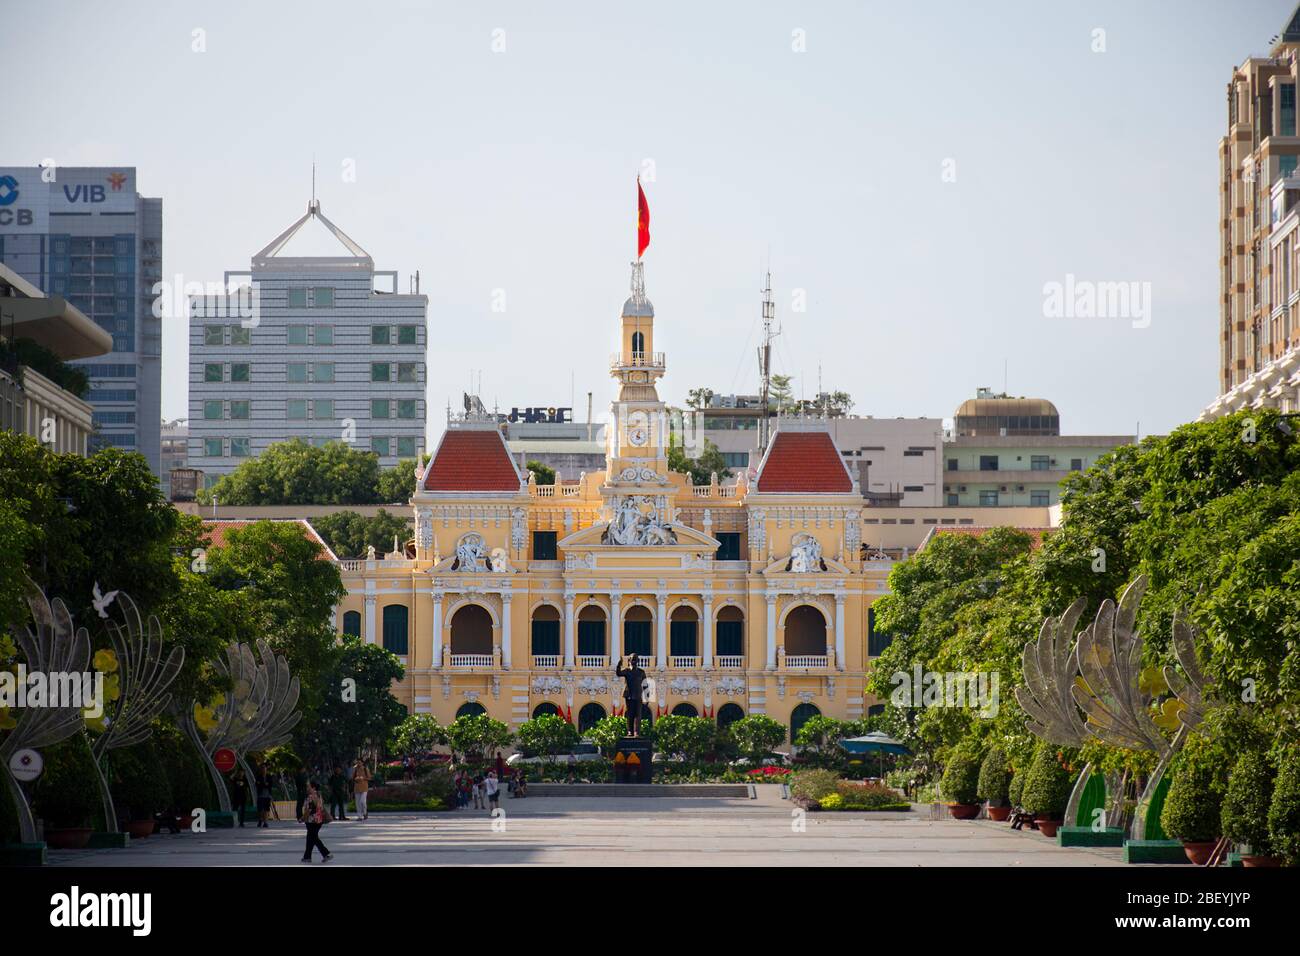 The Ho Chi Minh City Hall once was the Ho Chi Minh City Hall, Ho Chi Minh City People's Committee Head office of HCMC, Vietnam. Stock Photo